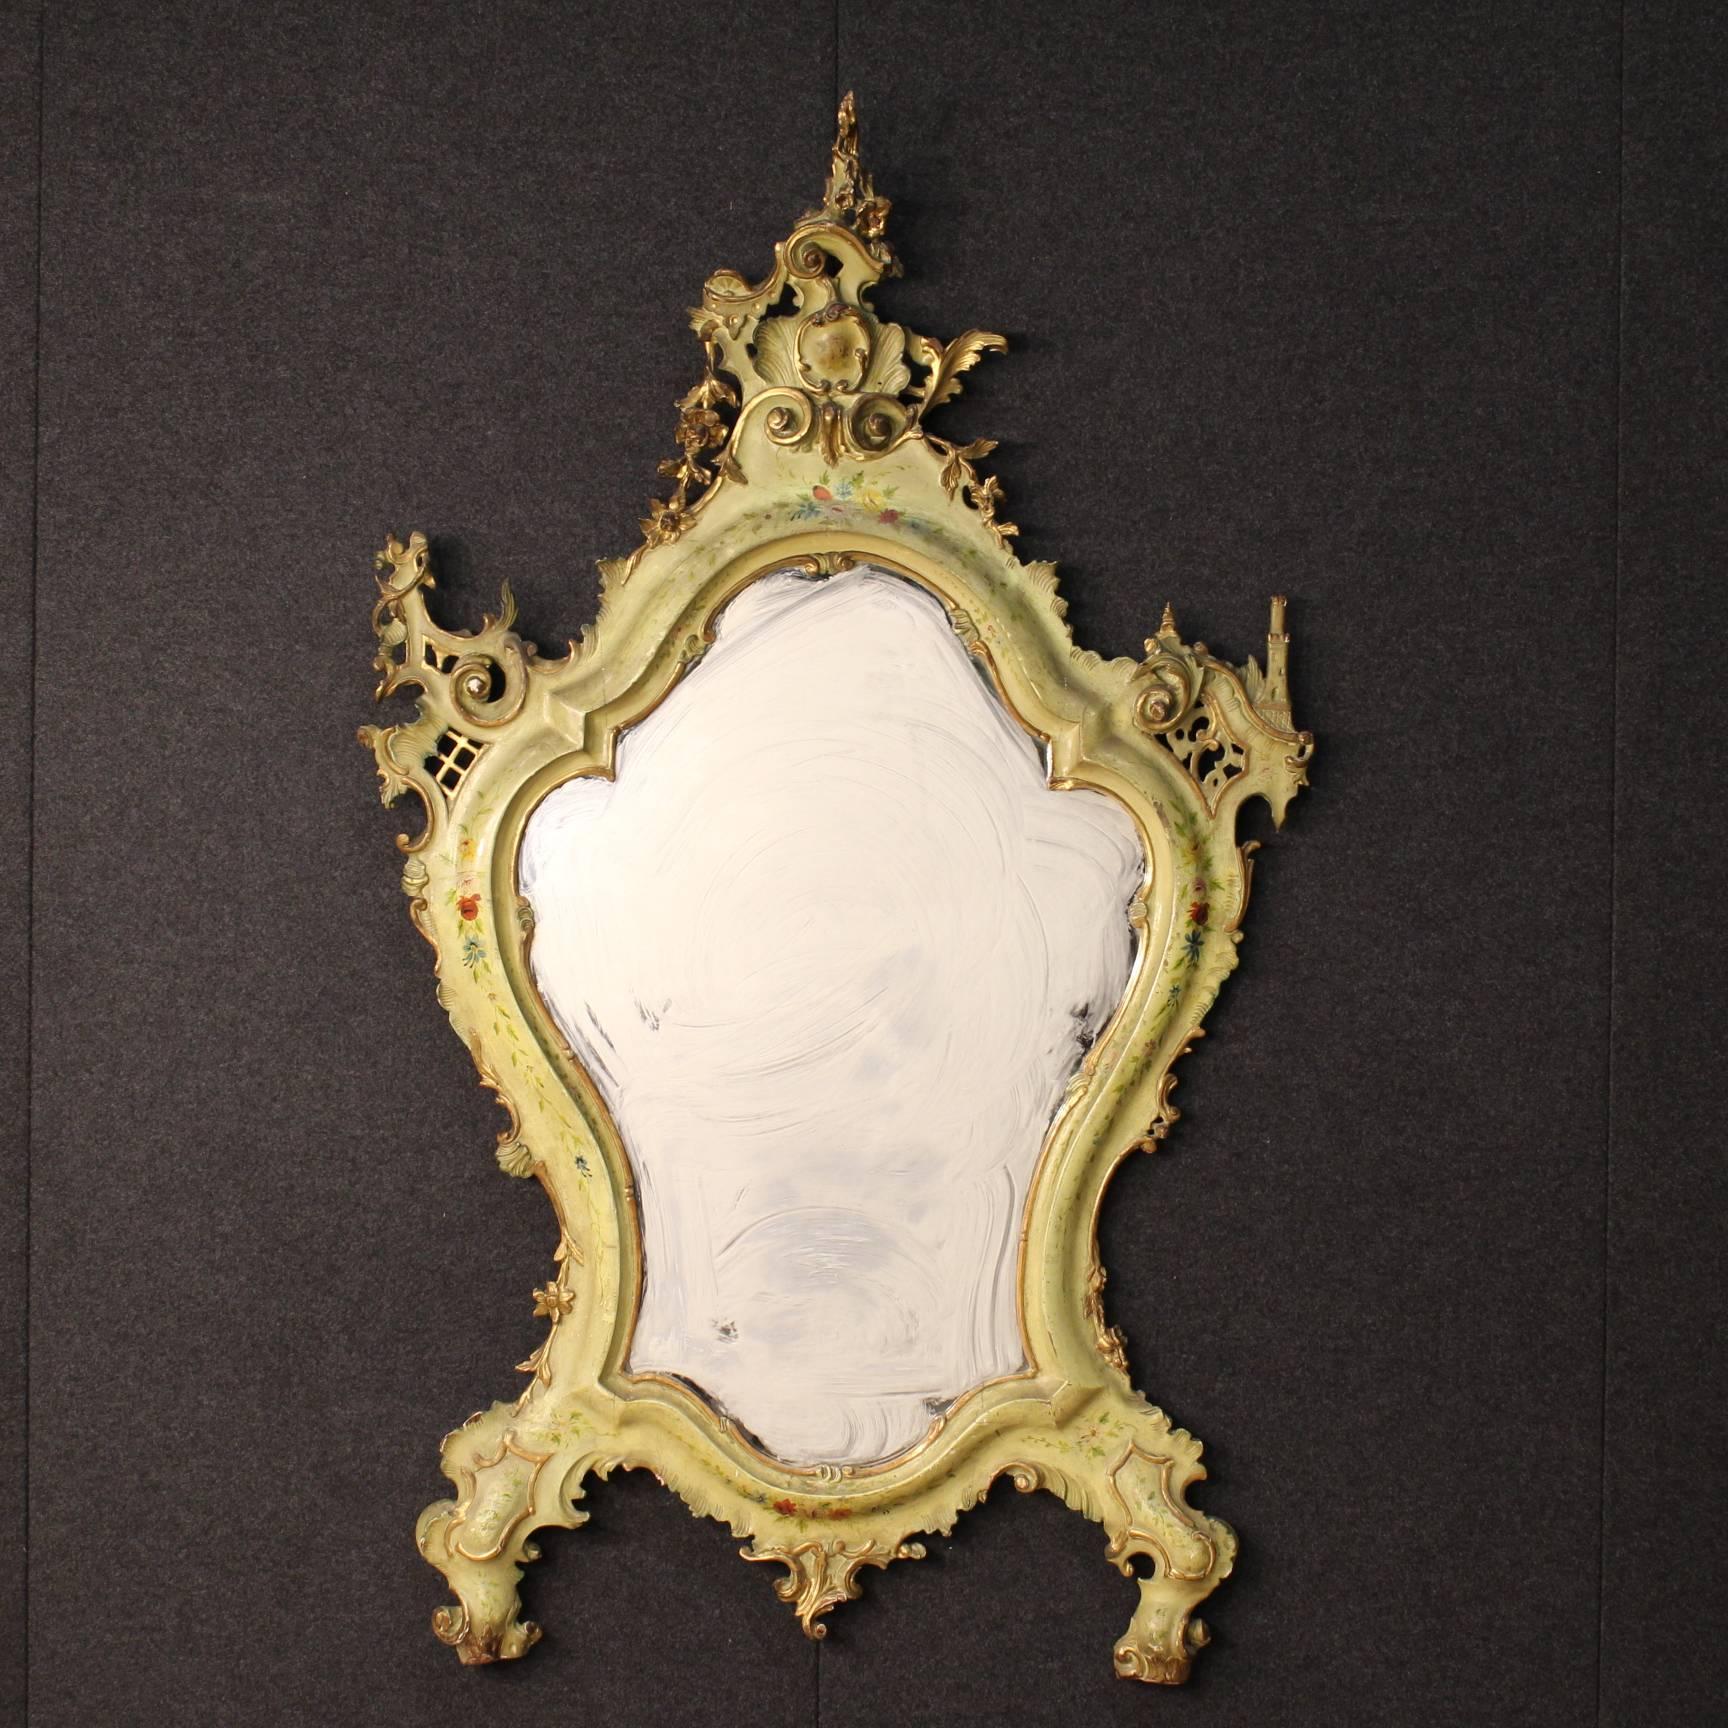 Big Venetian mirror of the second half of the 19th century. Furniture finely carved, gilded, lacquered and hand-painted with floral motifs. Rare mirror even for the special asymmetrical construction: note the sculpture of a castle at the top right.